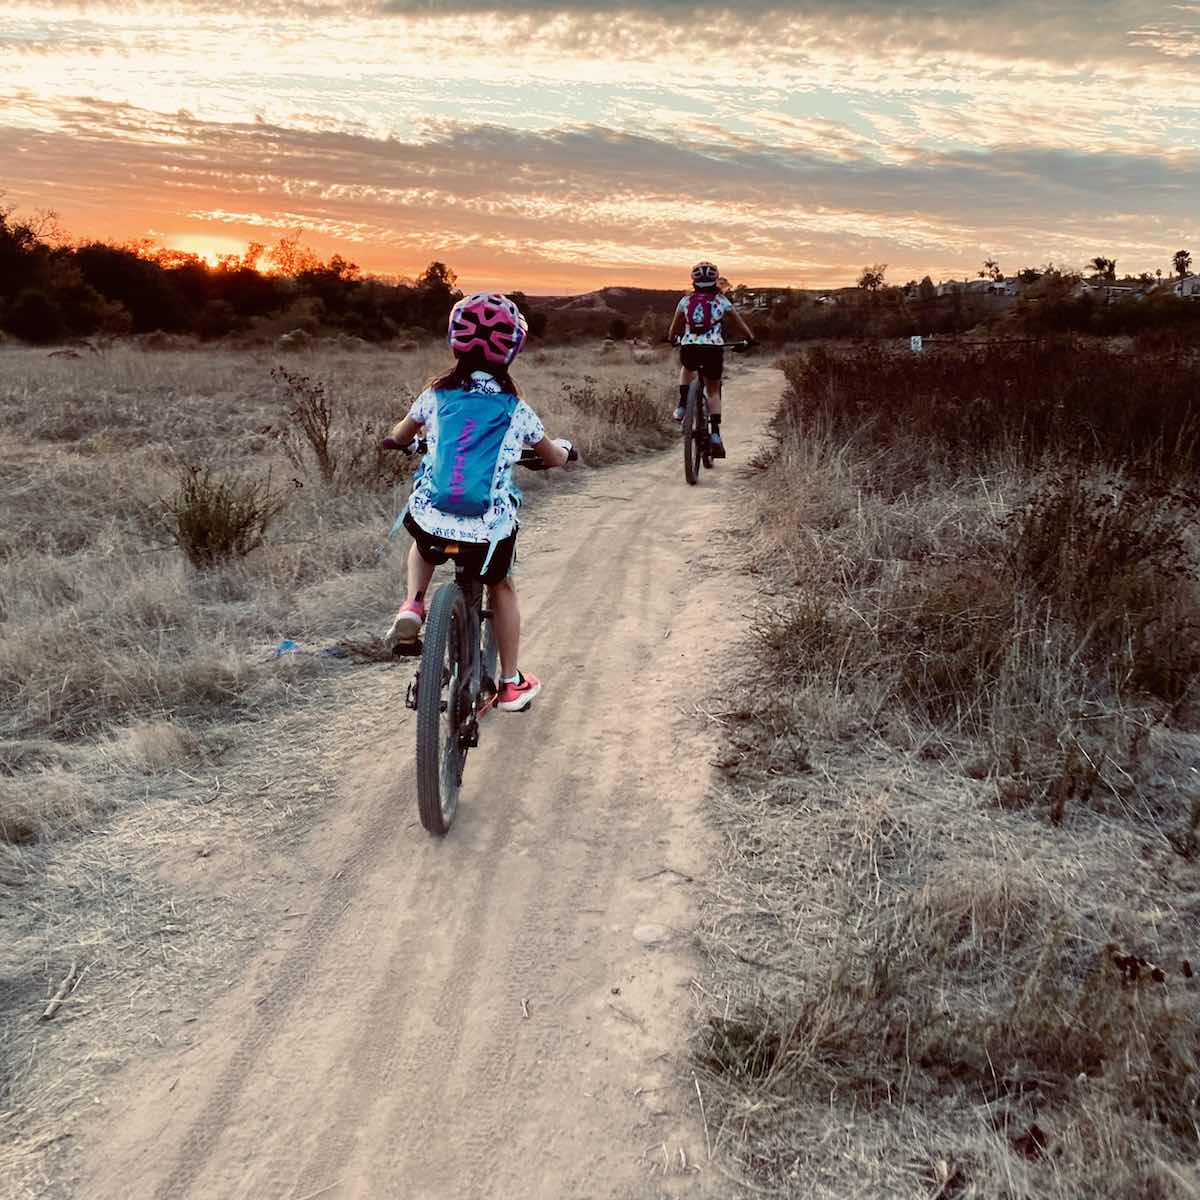 bikerumor pic of the day Los Penasquitos Canyon - San Diego, CA a child and another person on mountain bikes ride on a dirt path with sage colored brush on either side towards a grey and orange sunset.